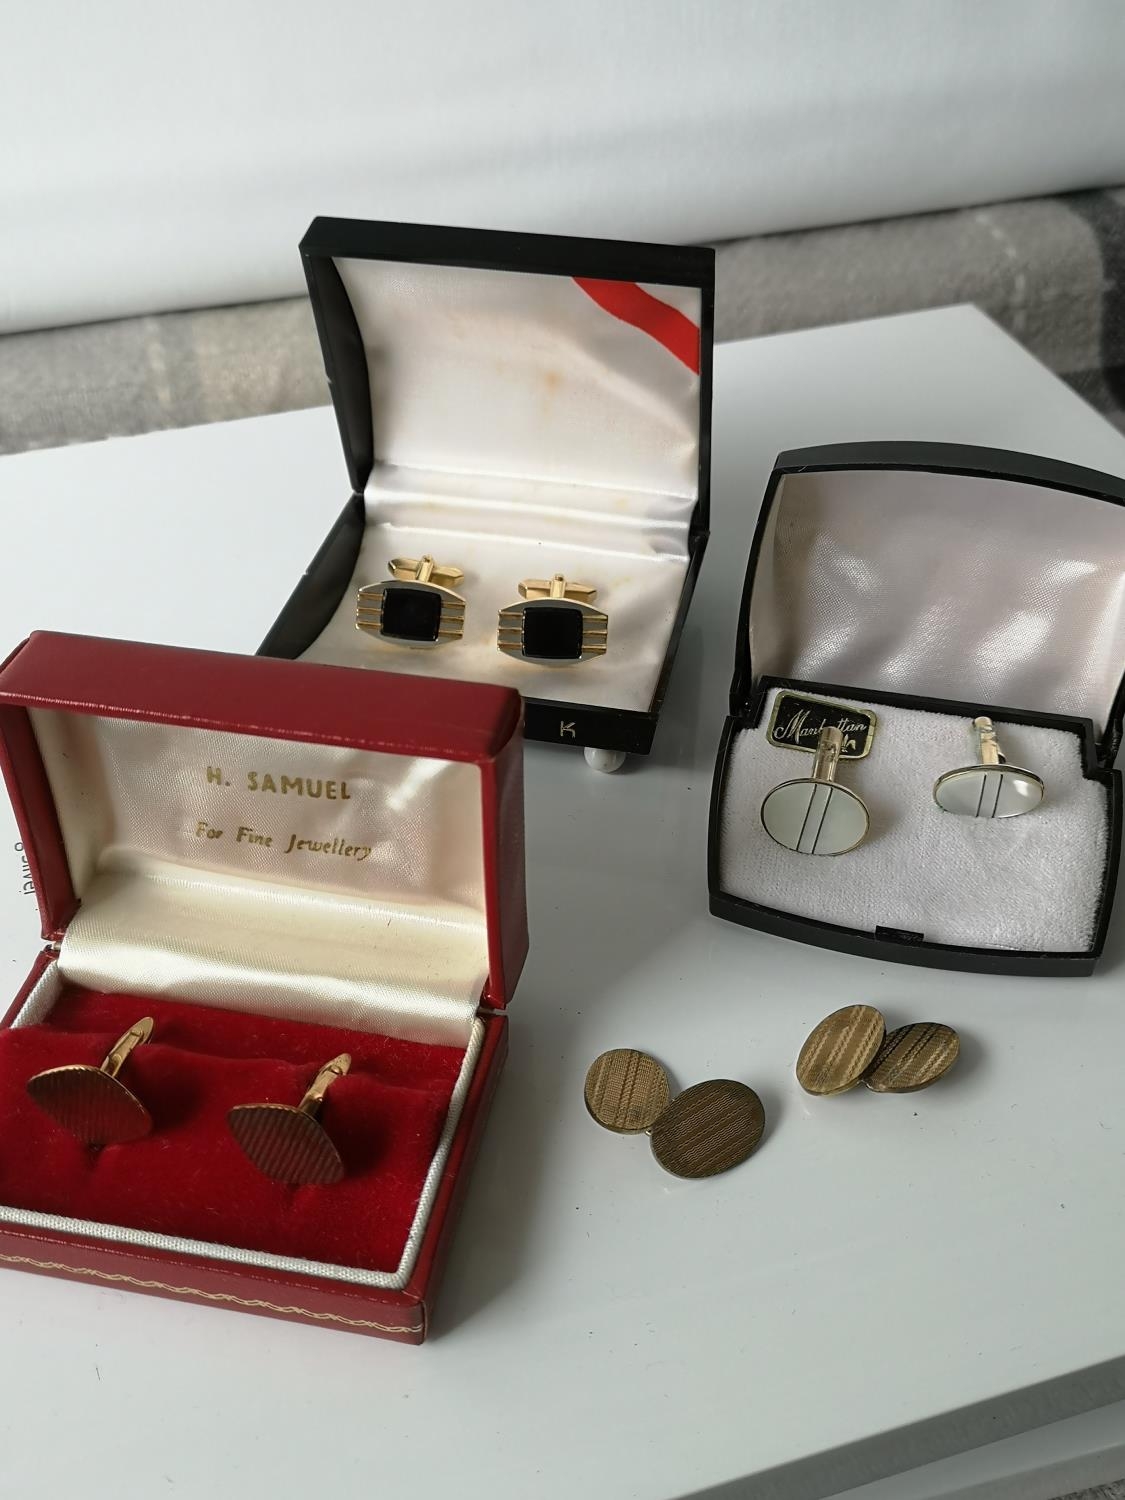 A Pair of vintage 9ct gold cufflinks with original box produced by H. Samuel. [7.48grams] a pair